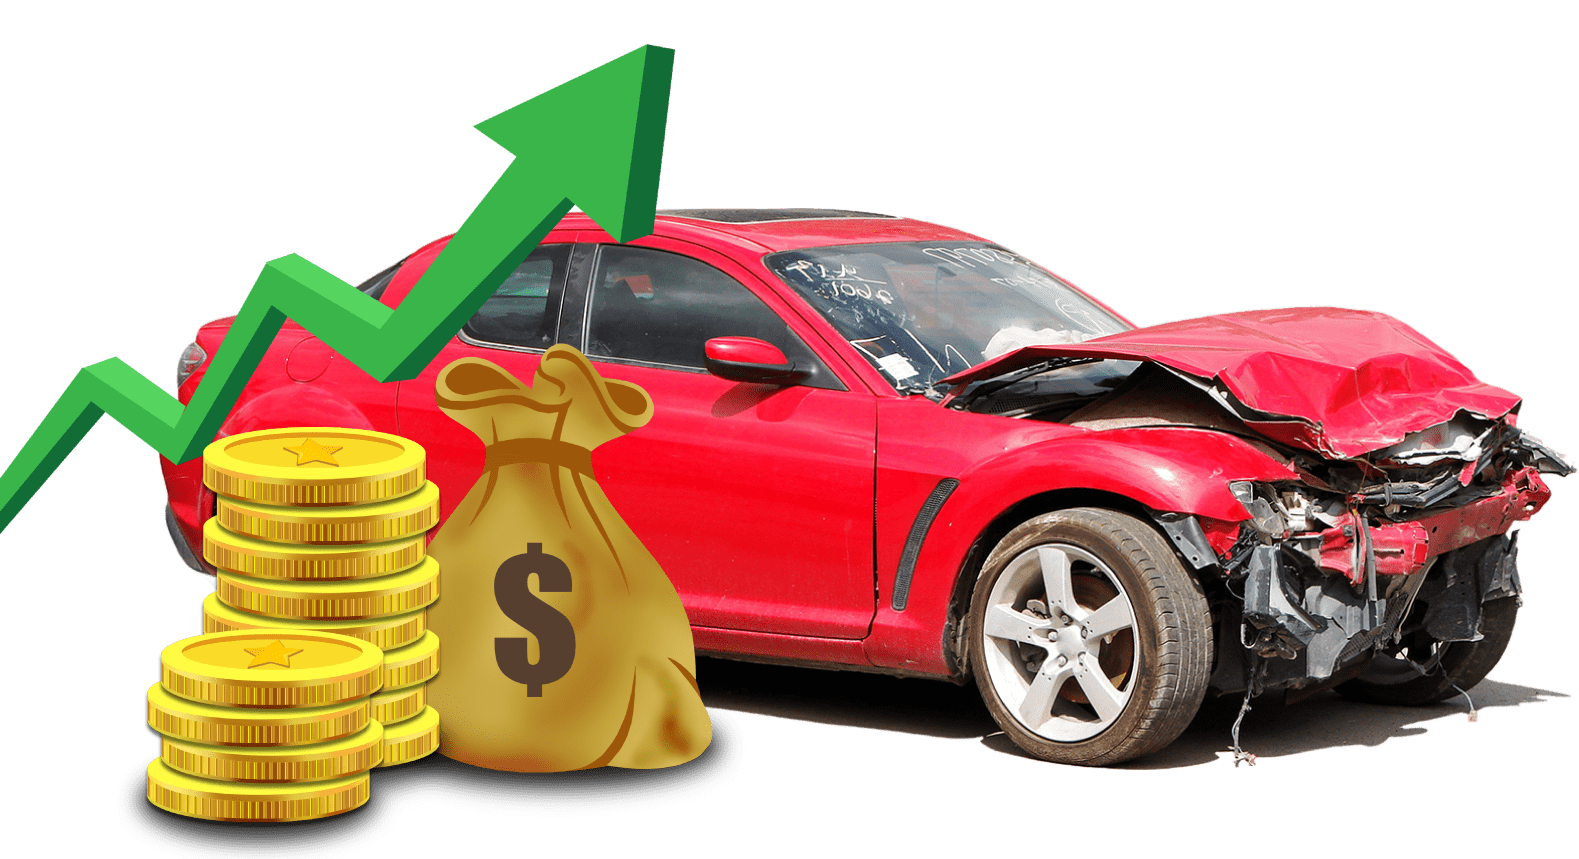  Cash for scrap cars woolshed 